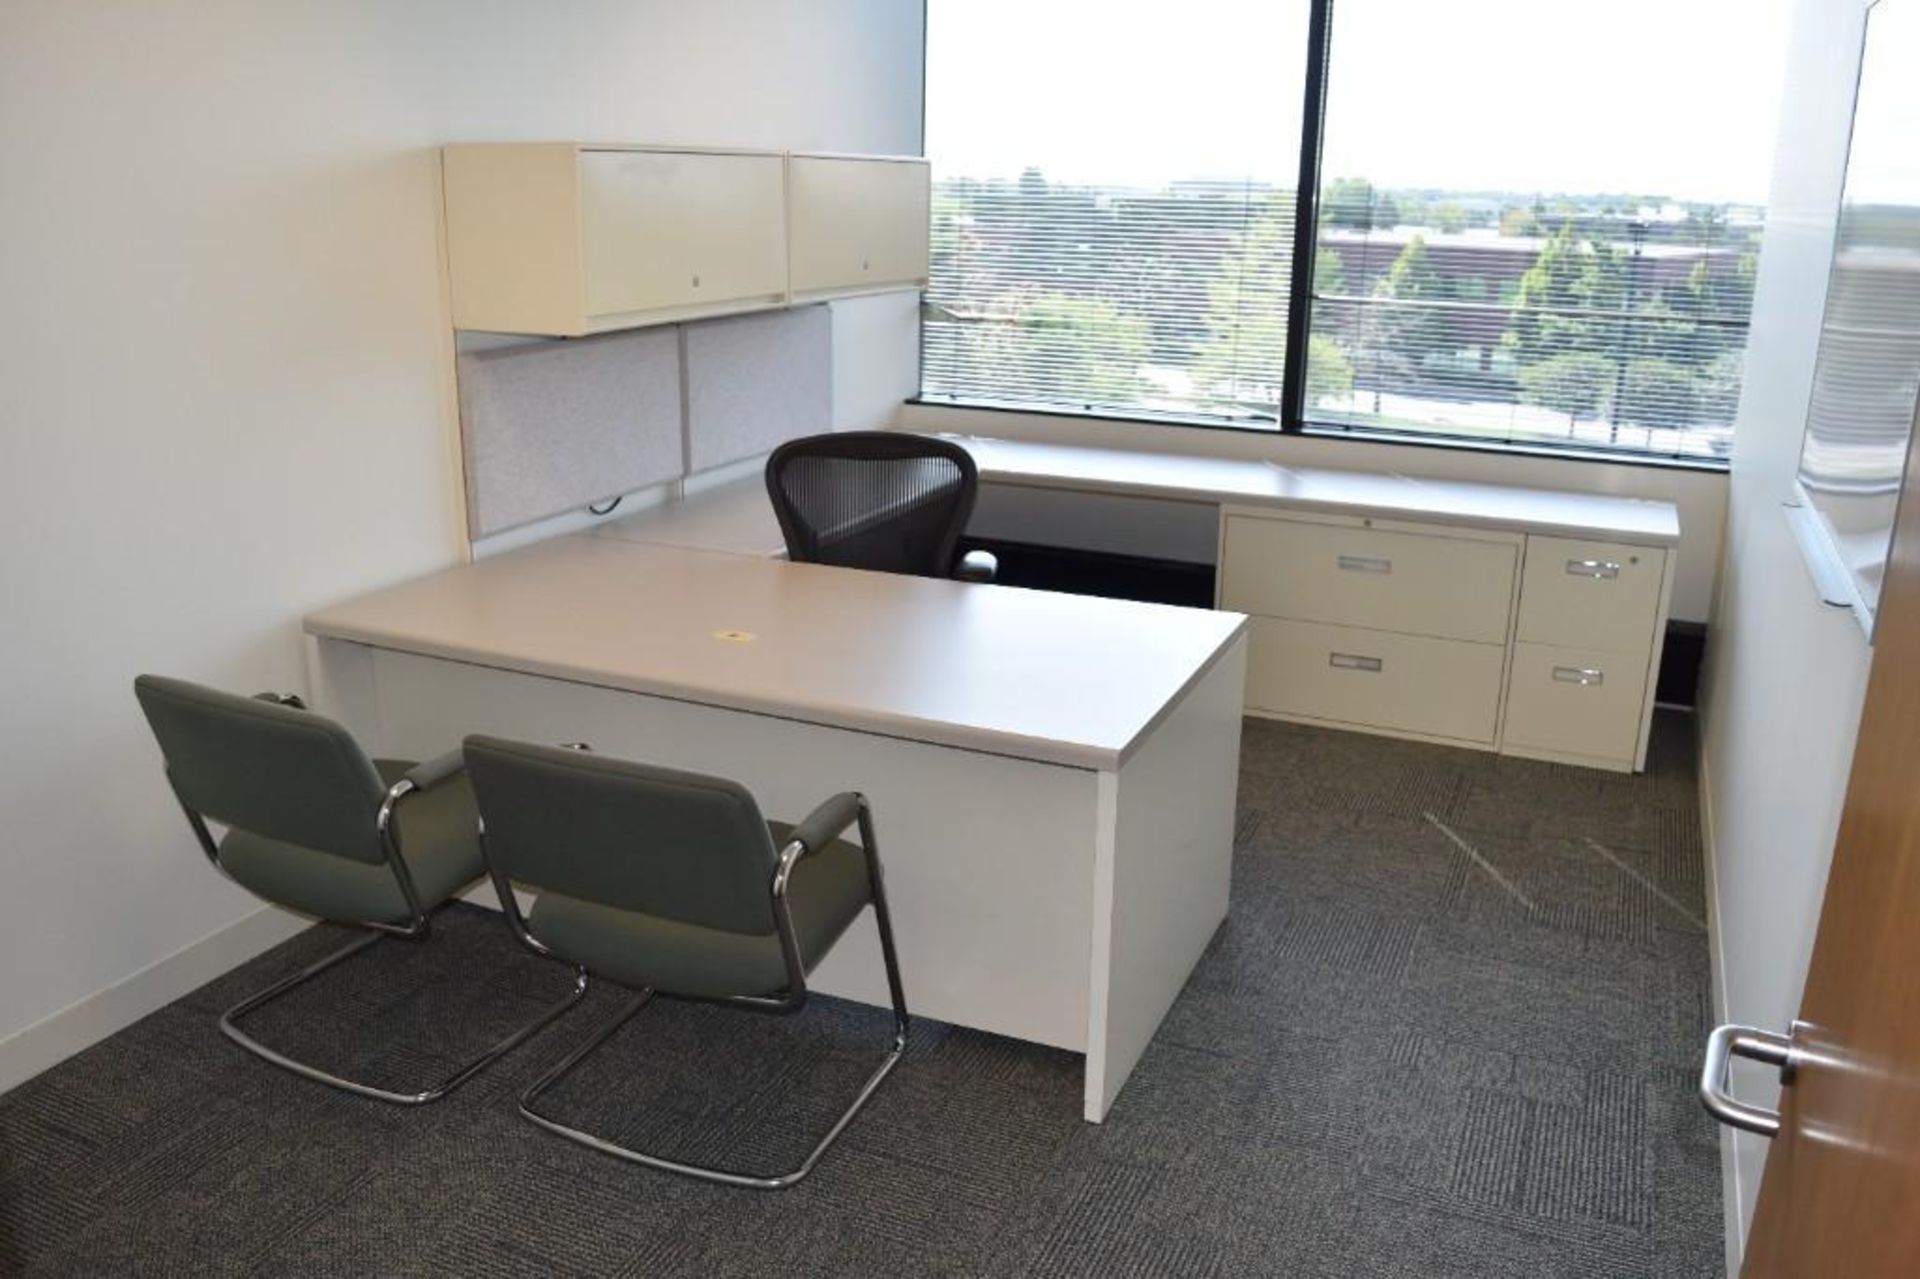 Lot c/o: (26) Assorted Office Suites - Relocated for ease of removal - Image 26 of 106